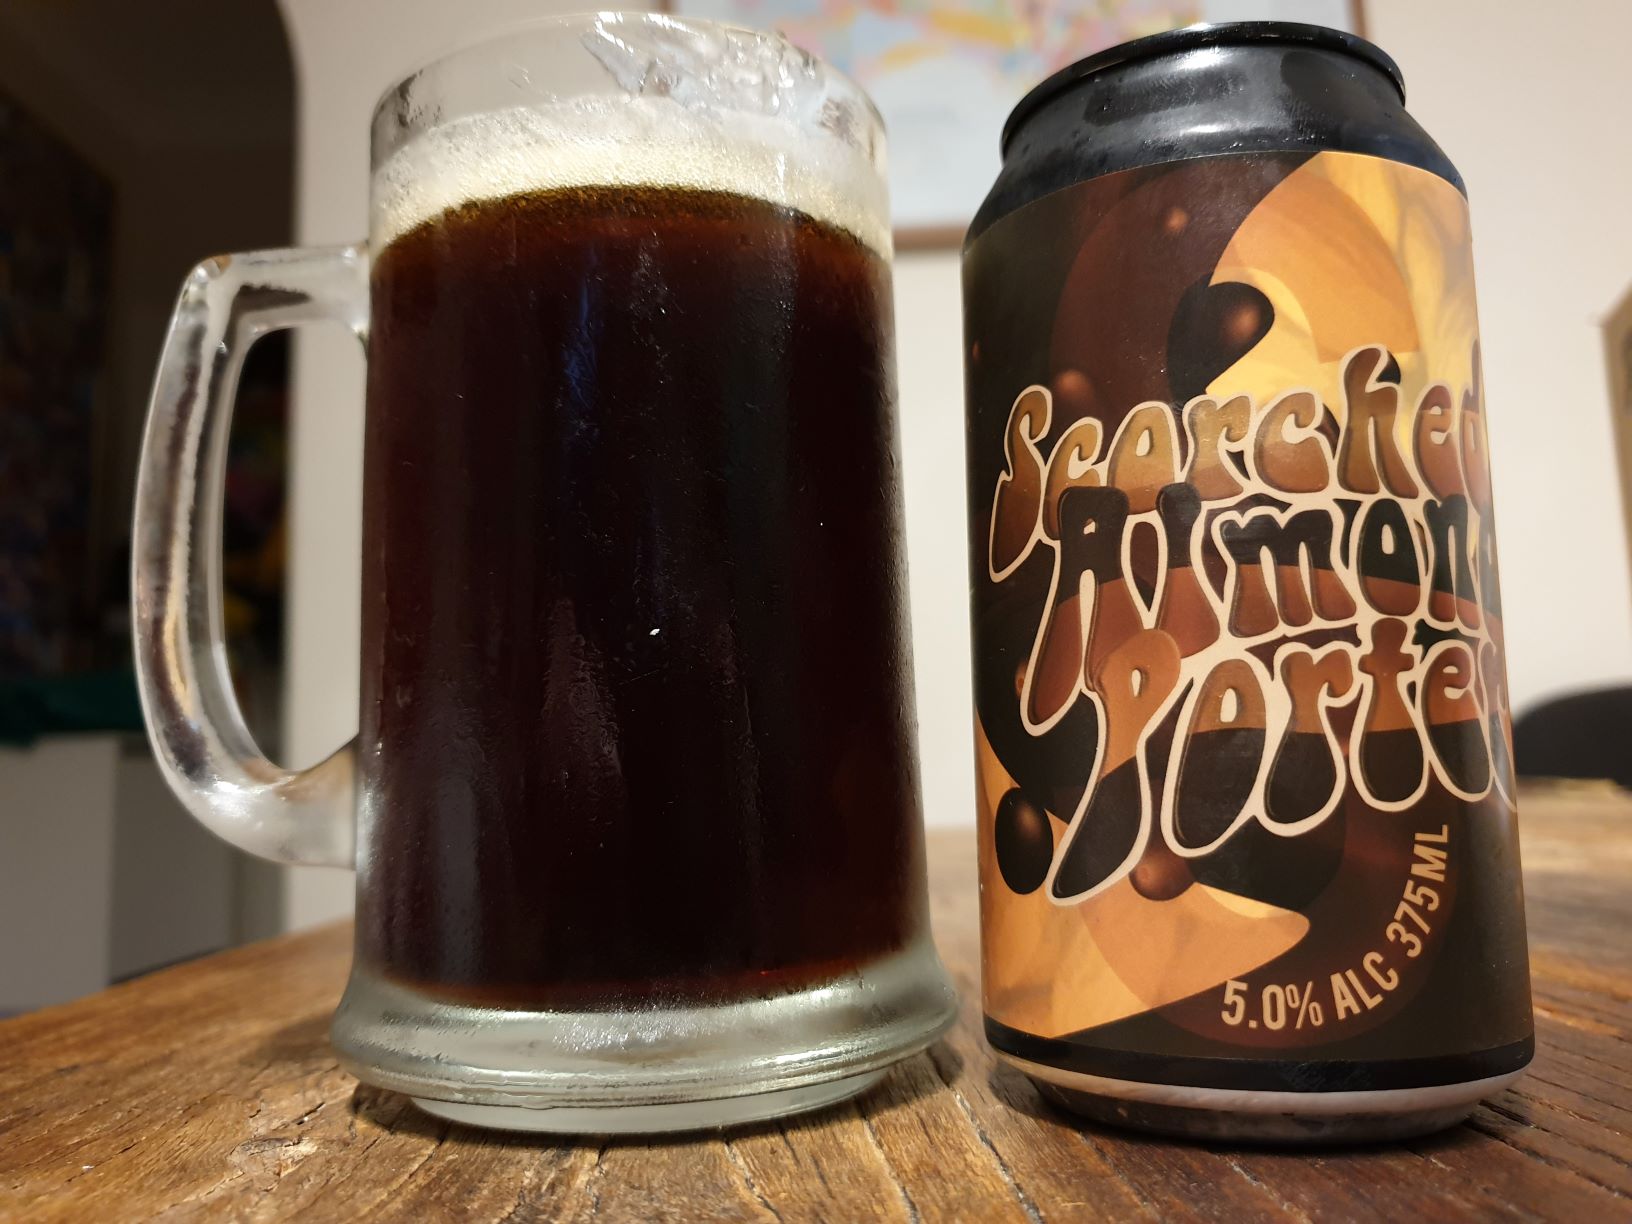 Scorched Almond Porter by Woolshed Brewery